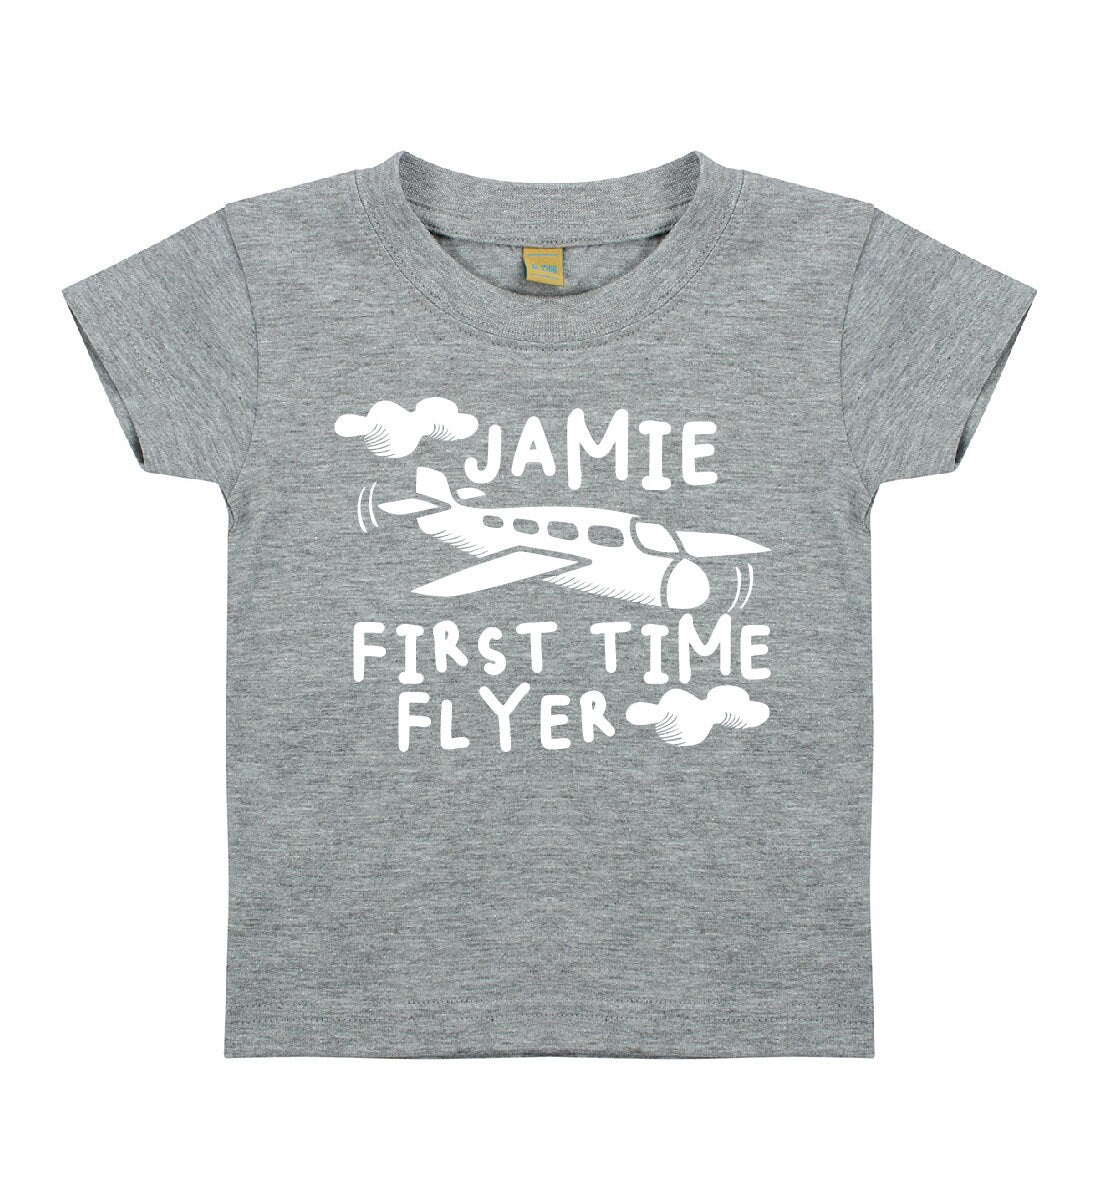 Kids Personalised First Time Flyer T-Shirt - Any Name Children's Holiday Vacation Tee